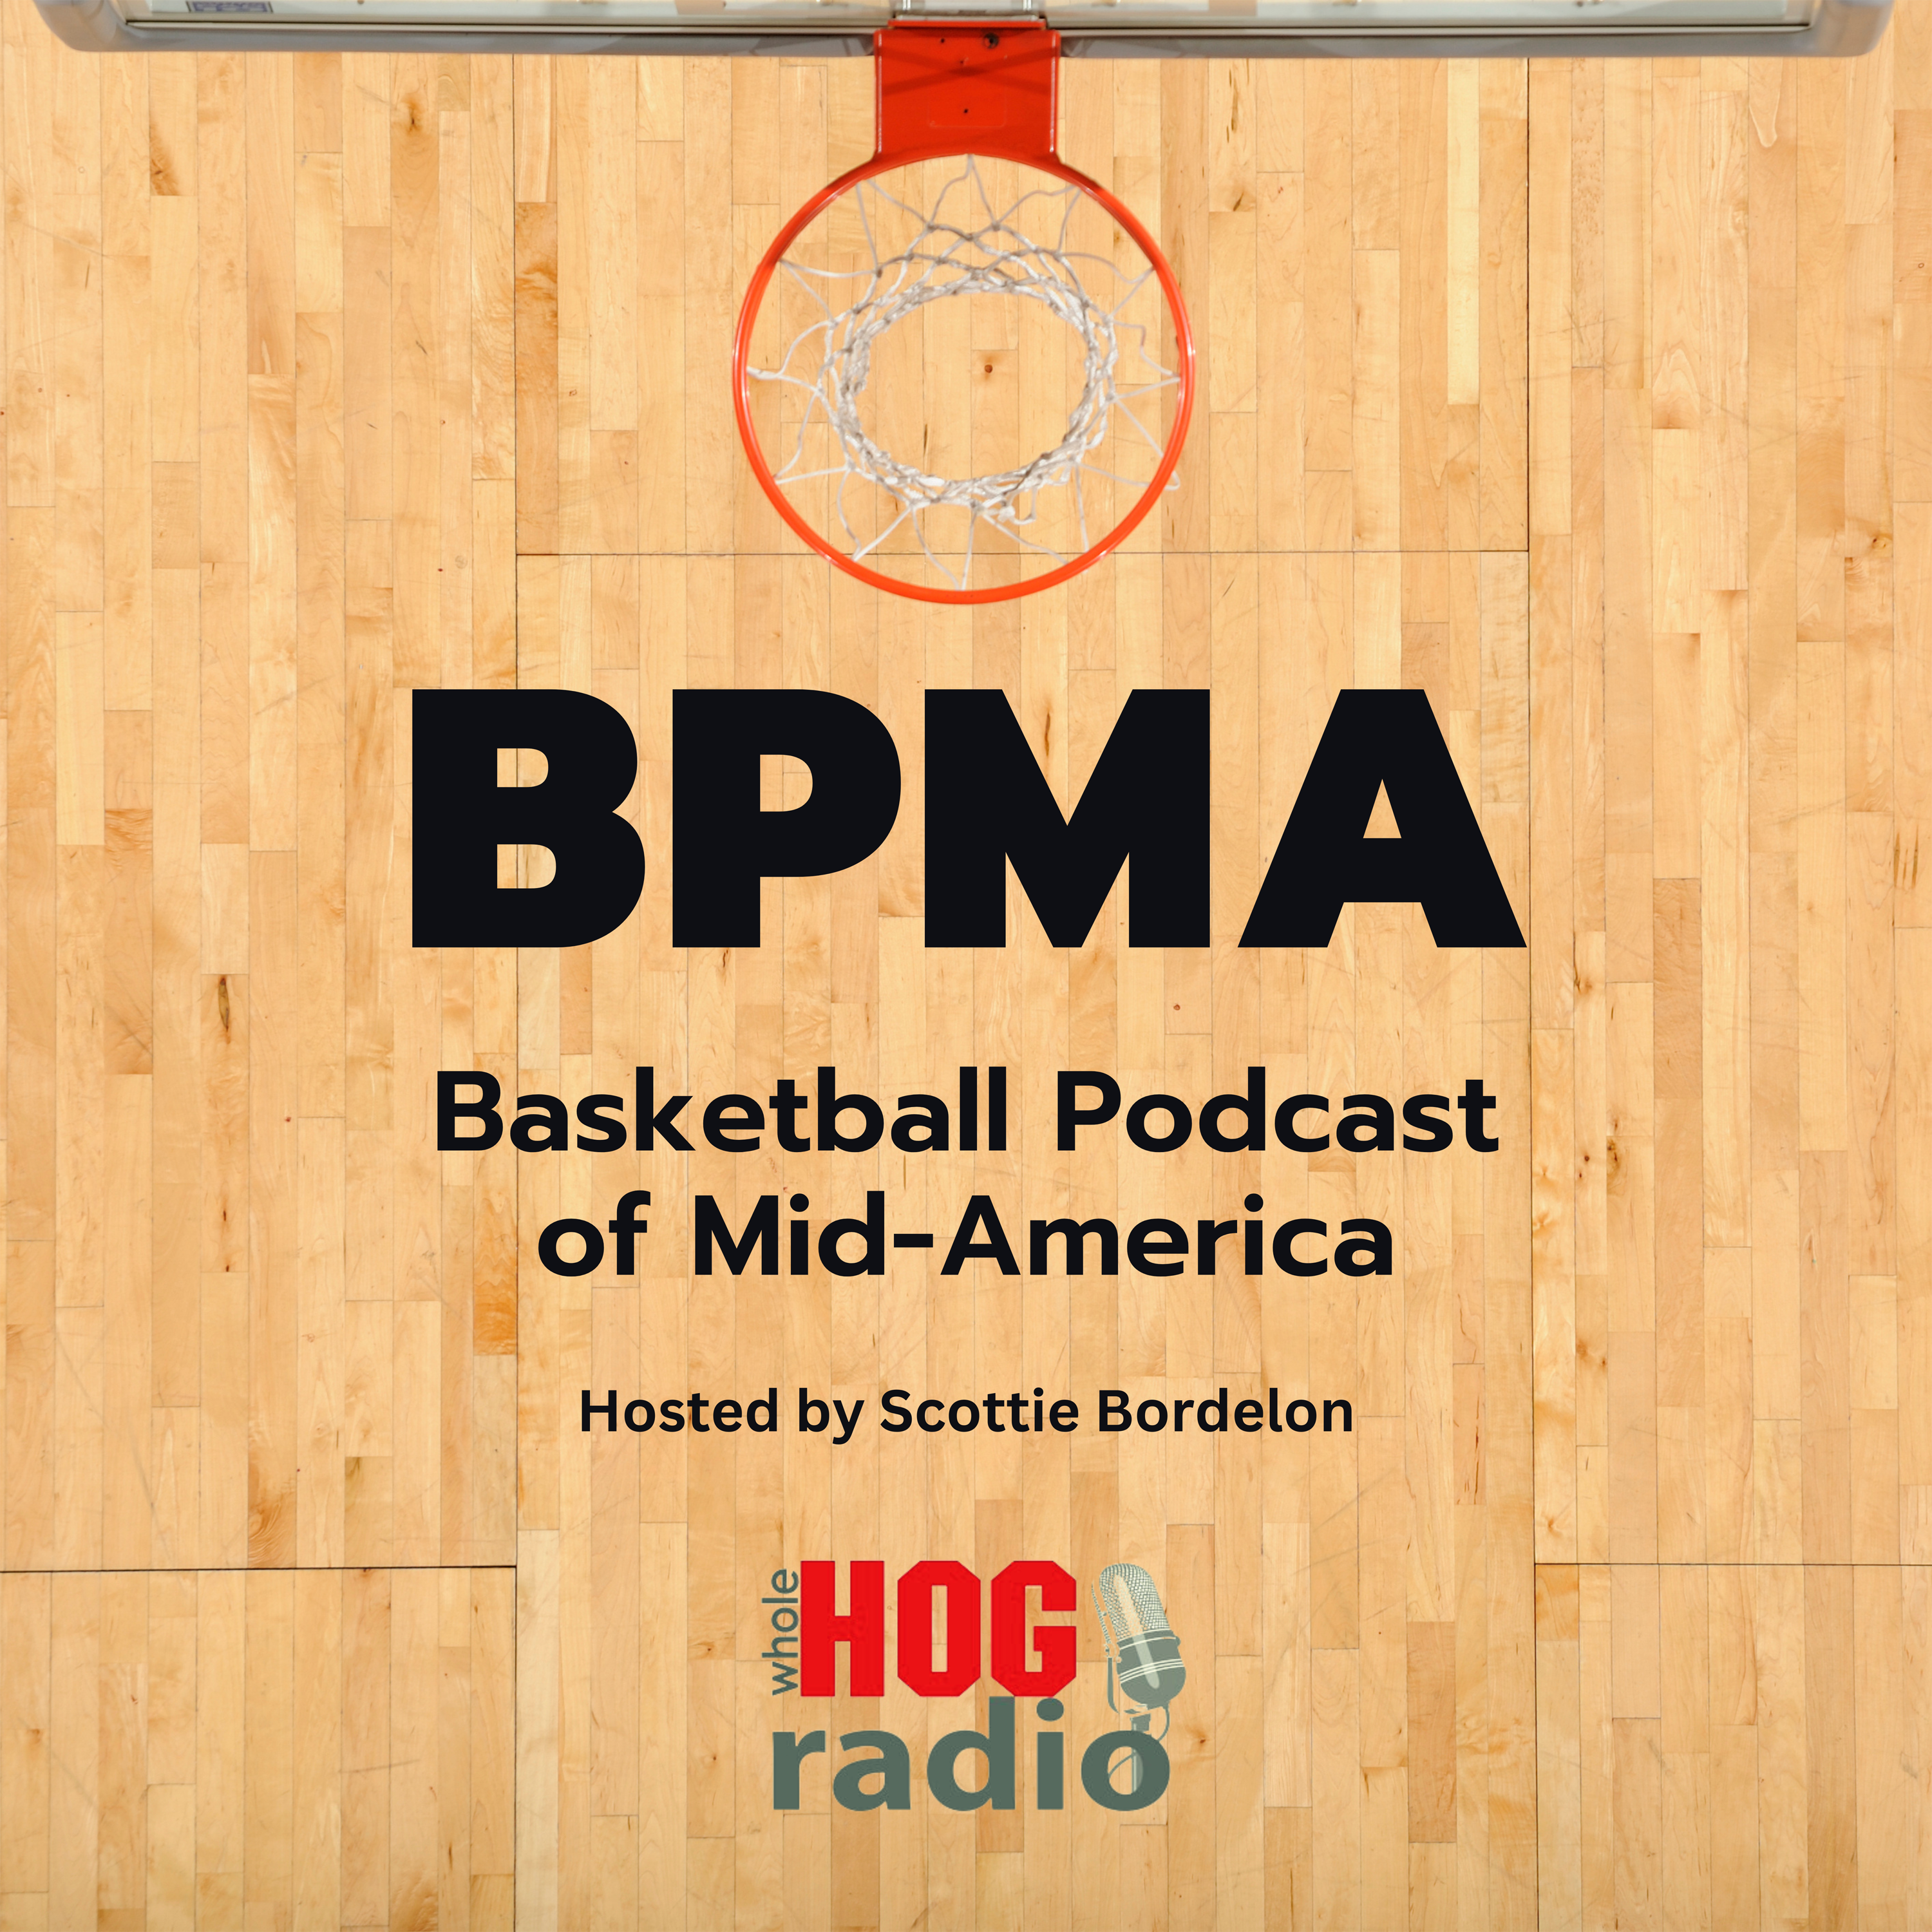 Basketball Podcast of Mid-America: Season Officially Underway, Subscriber Mailbag